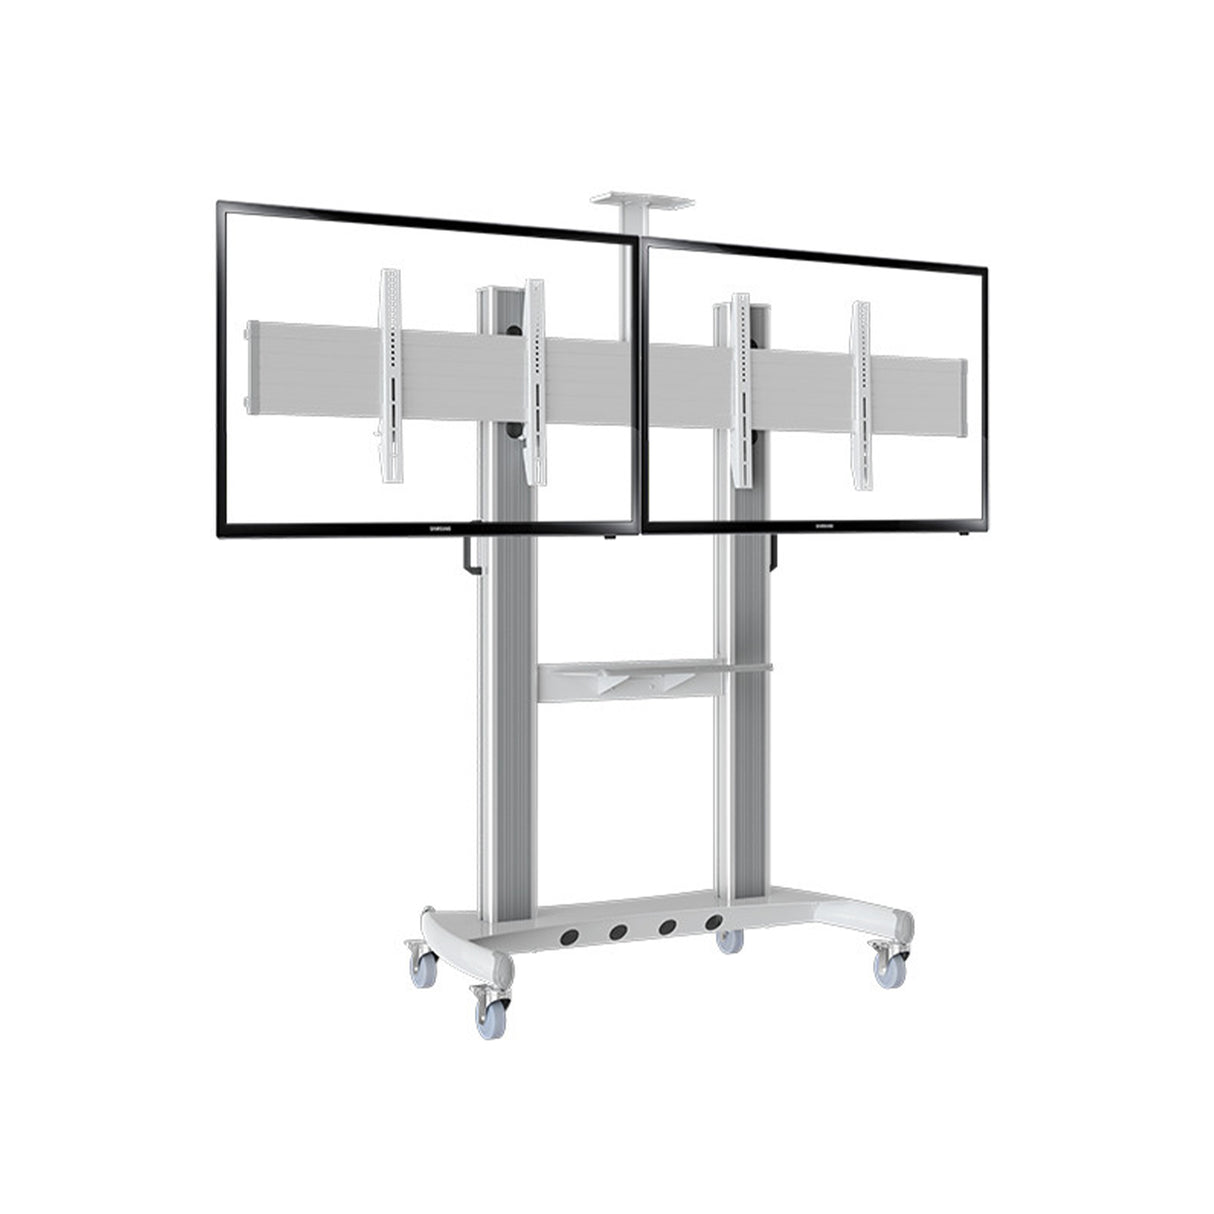 Tono OFS 70D - Dual TV Stand